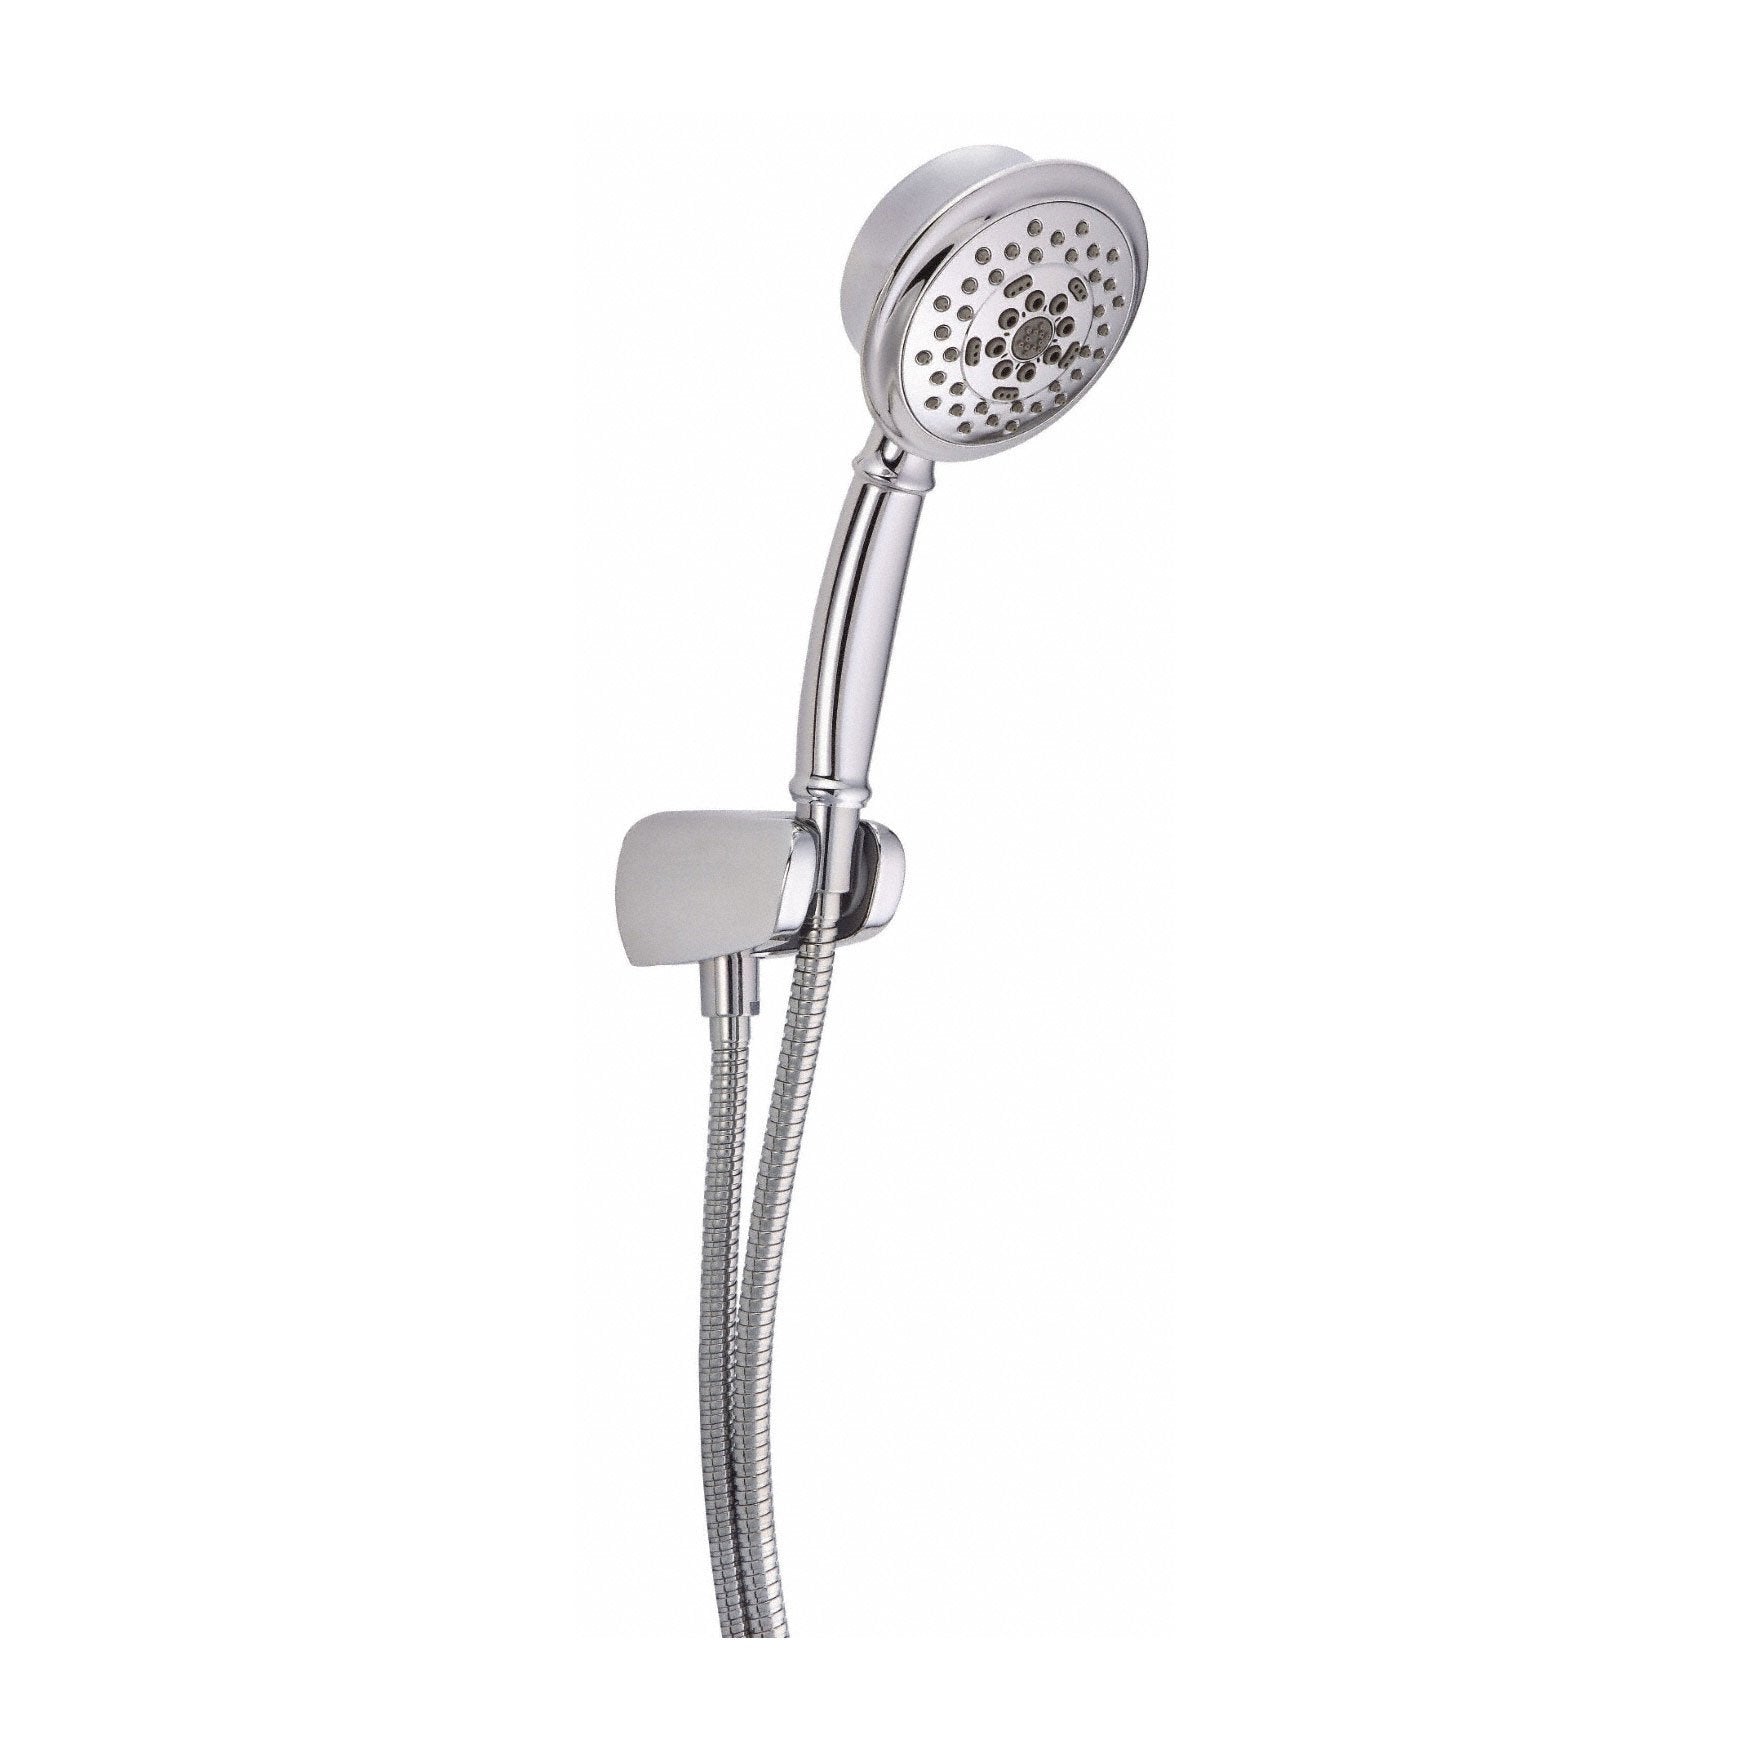 Danze Chrome Best Hand Held Shower Head with Hose and Mount Kit